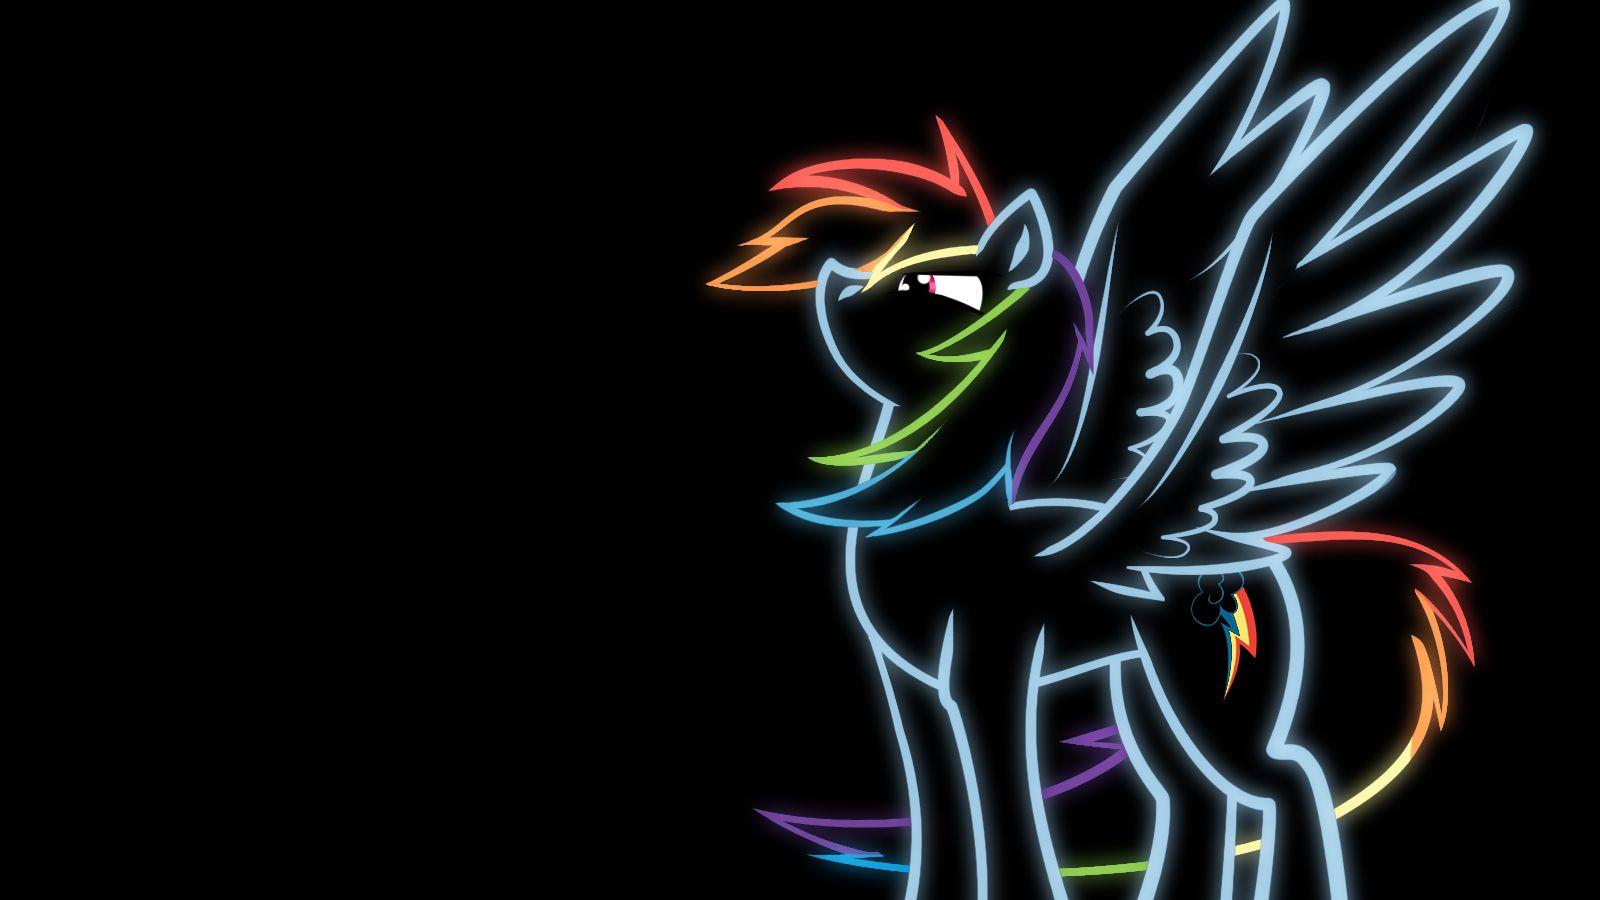 V.458 Rainbow Dash, HD Widescreen Image for desktop and mobile